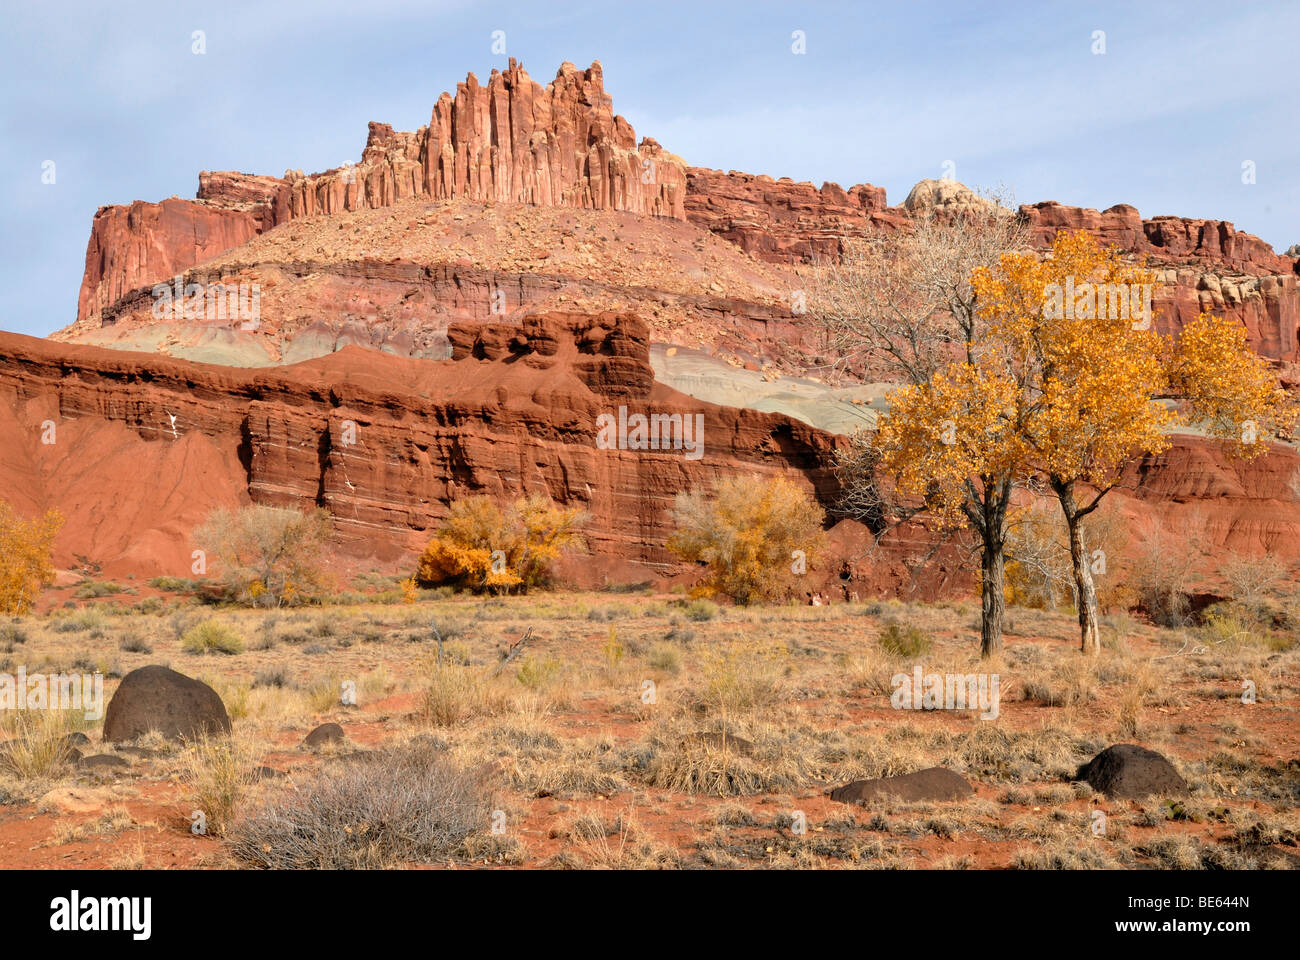 The Castle sandstone formation, Wingate Sandstone, in the front Aspen (Populus tremula) and Hamburger Rocks, Capitol Reef Natio Stock Photo